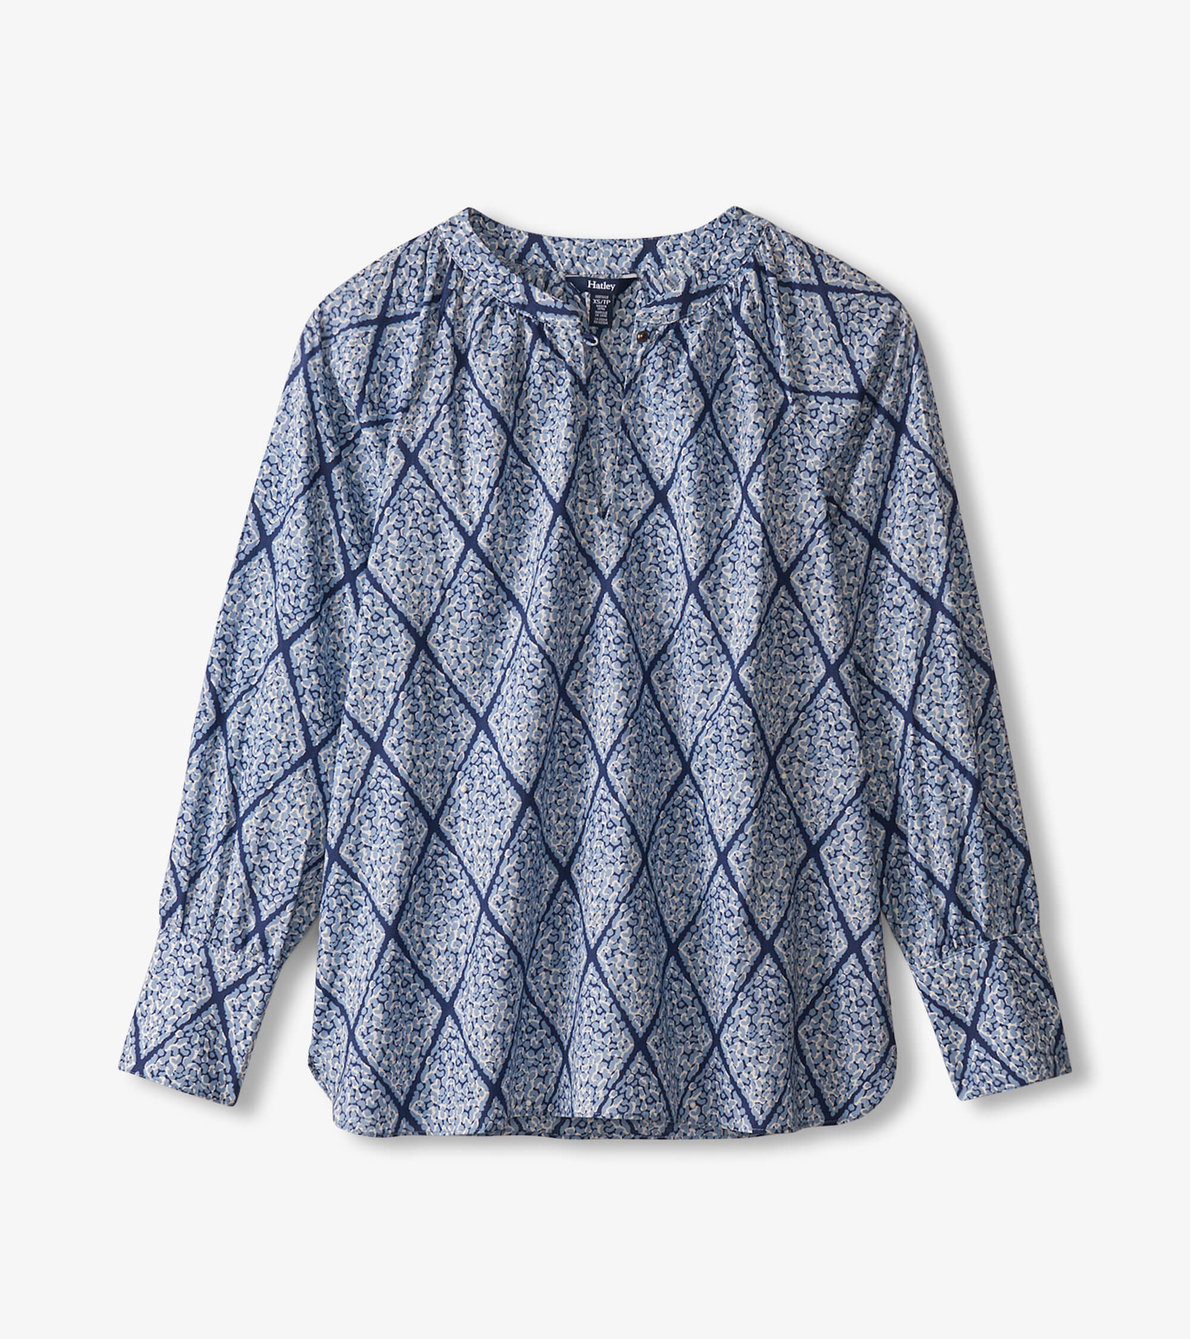 View larger image of Lila Blouse - Textured Diamonds